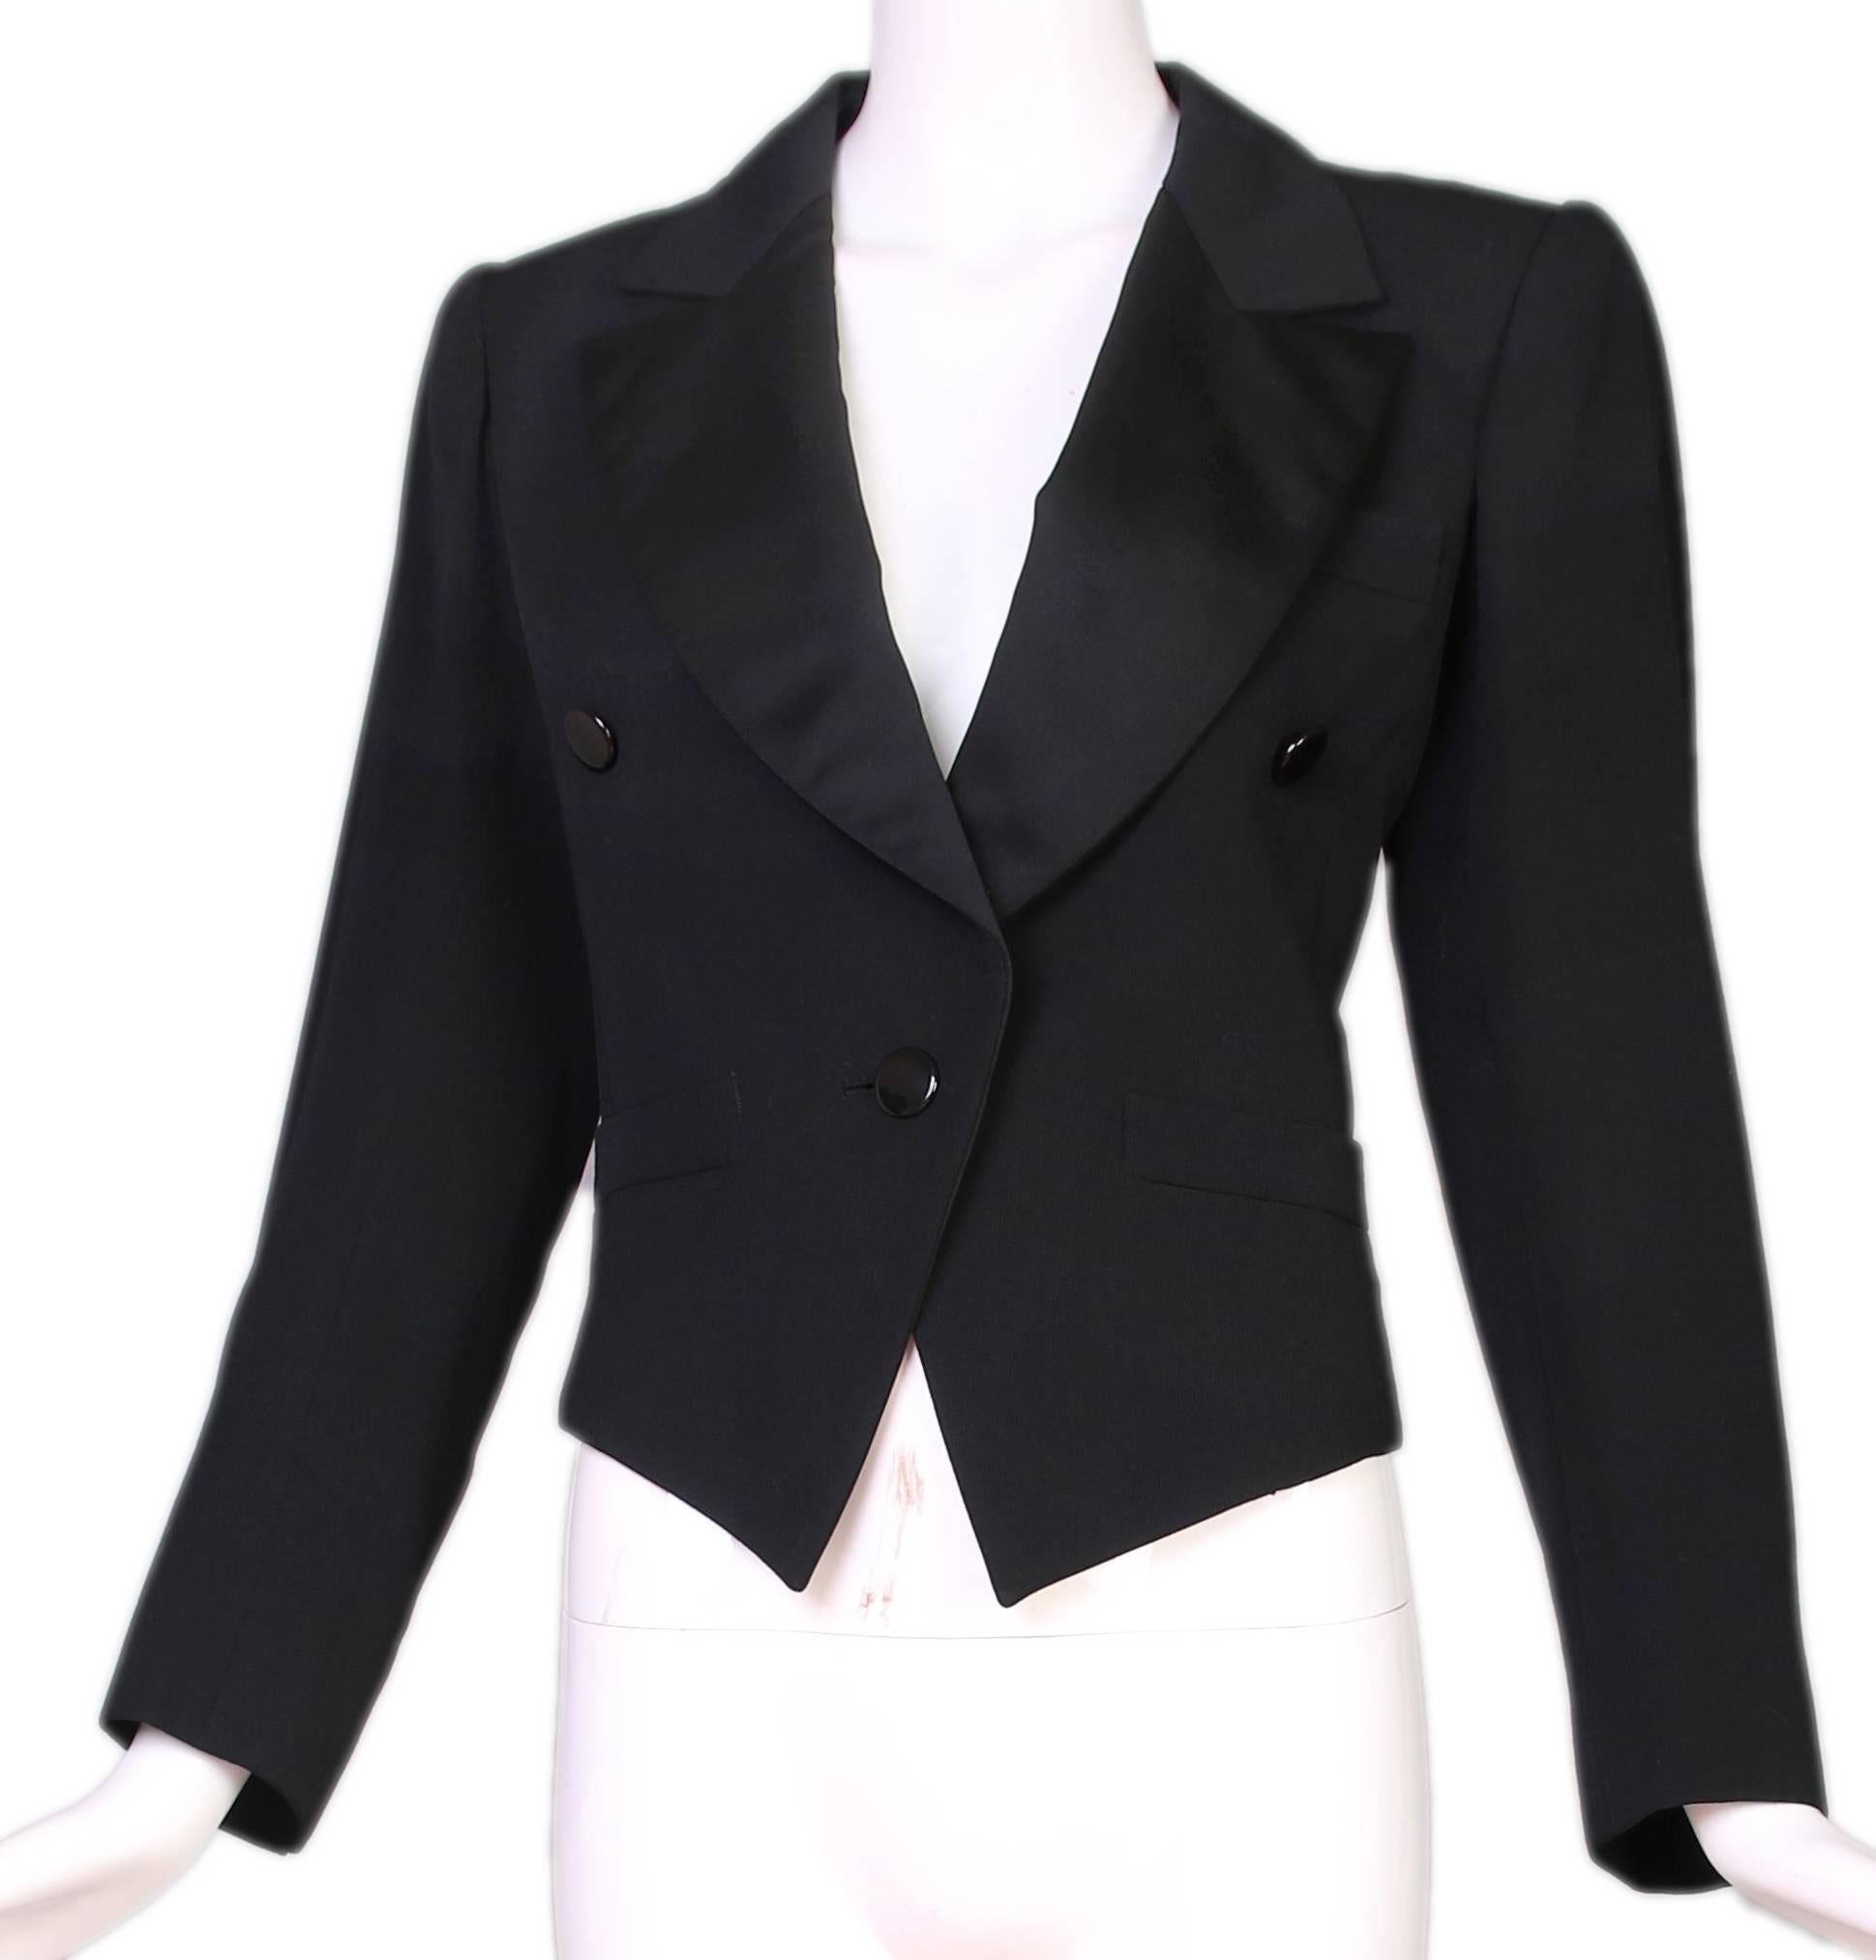 1970's Yves Saint Laurent YSL black lightweight wool cropped Le Smoking or tuxedo jacket with satin collar and lapel. In excellent condition, tag size 38. Silk YSL blouse and pants are sold separately.
MEASUREMENTS:
Bust - 36"
Waist -